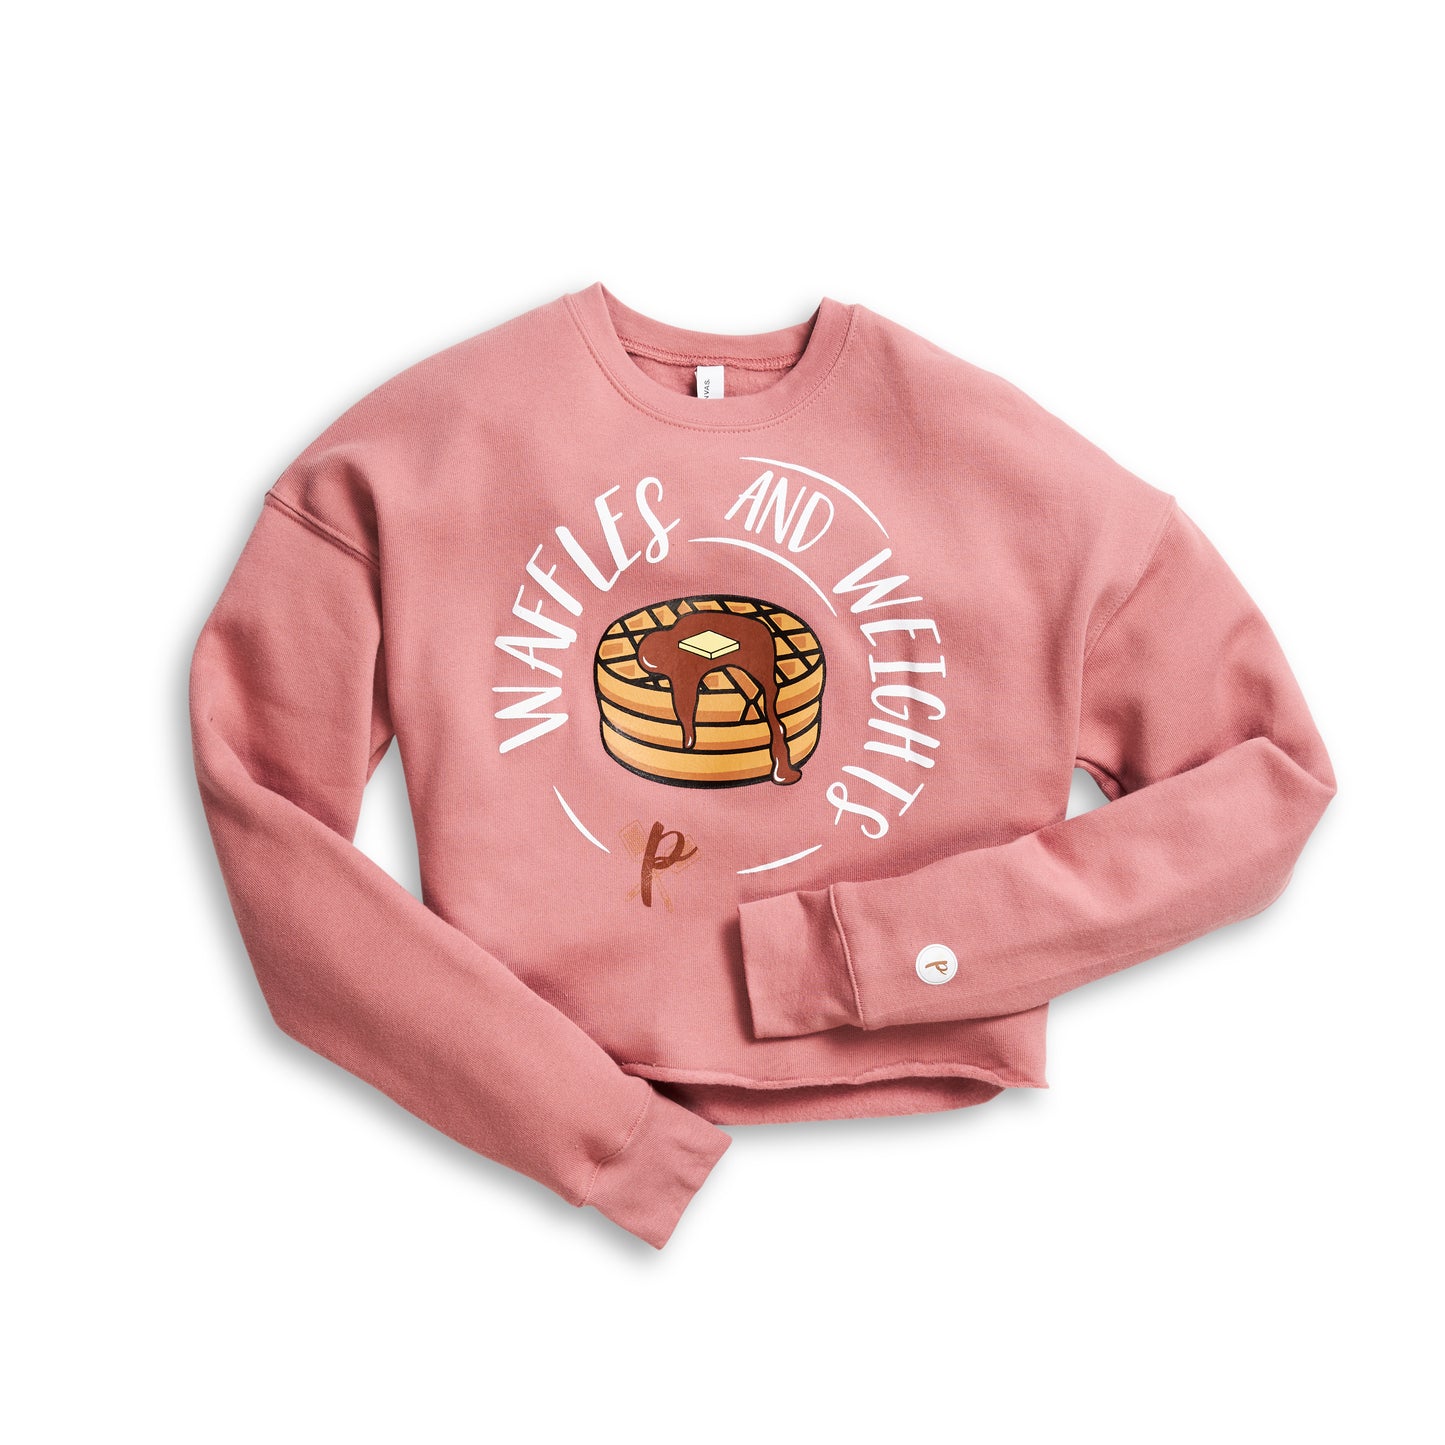 Women's Cropped Sweatshirt - Waffles and Weights PINK